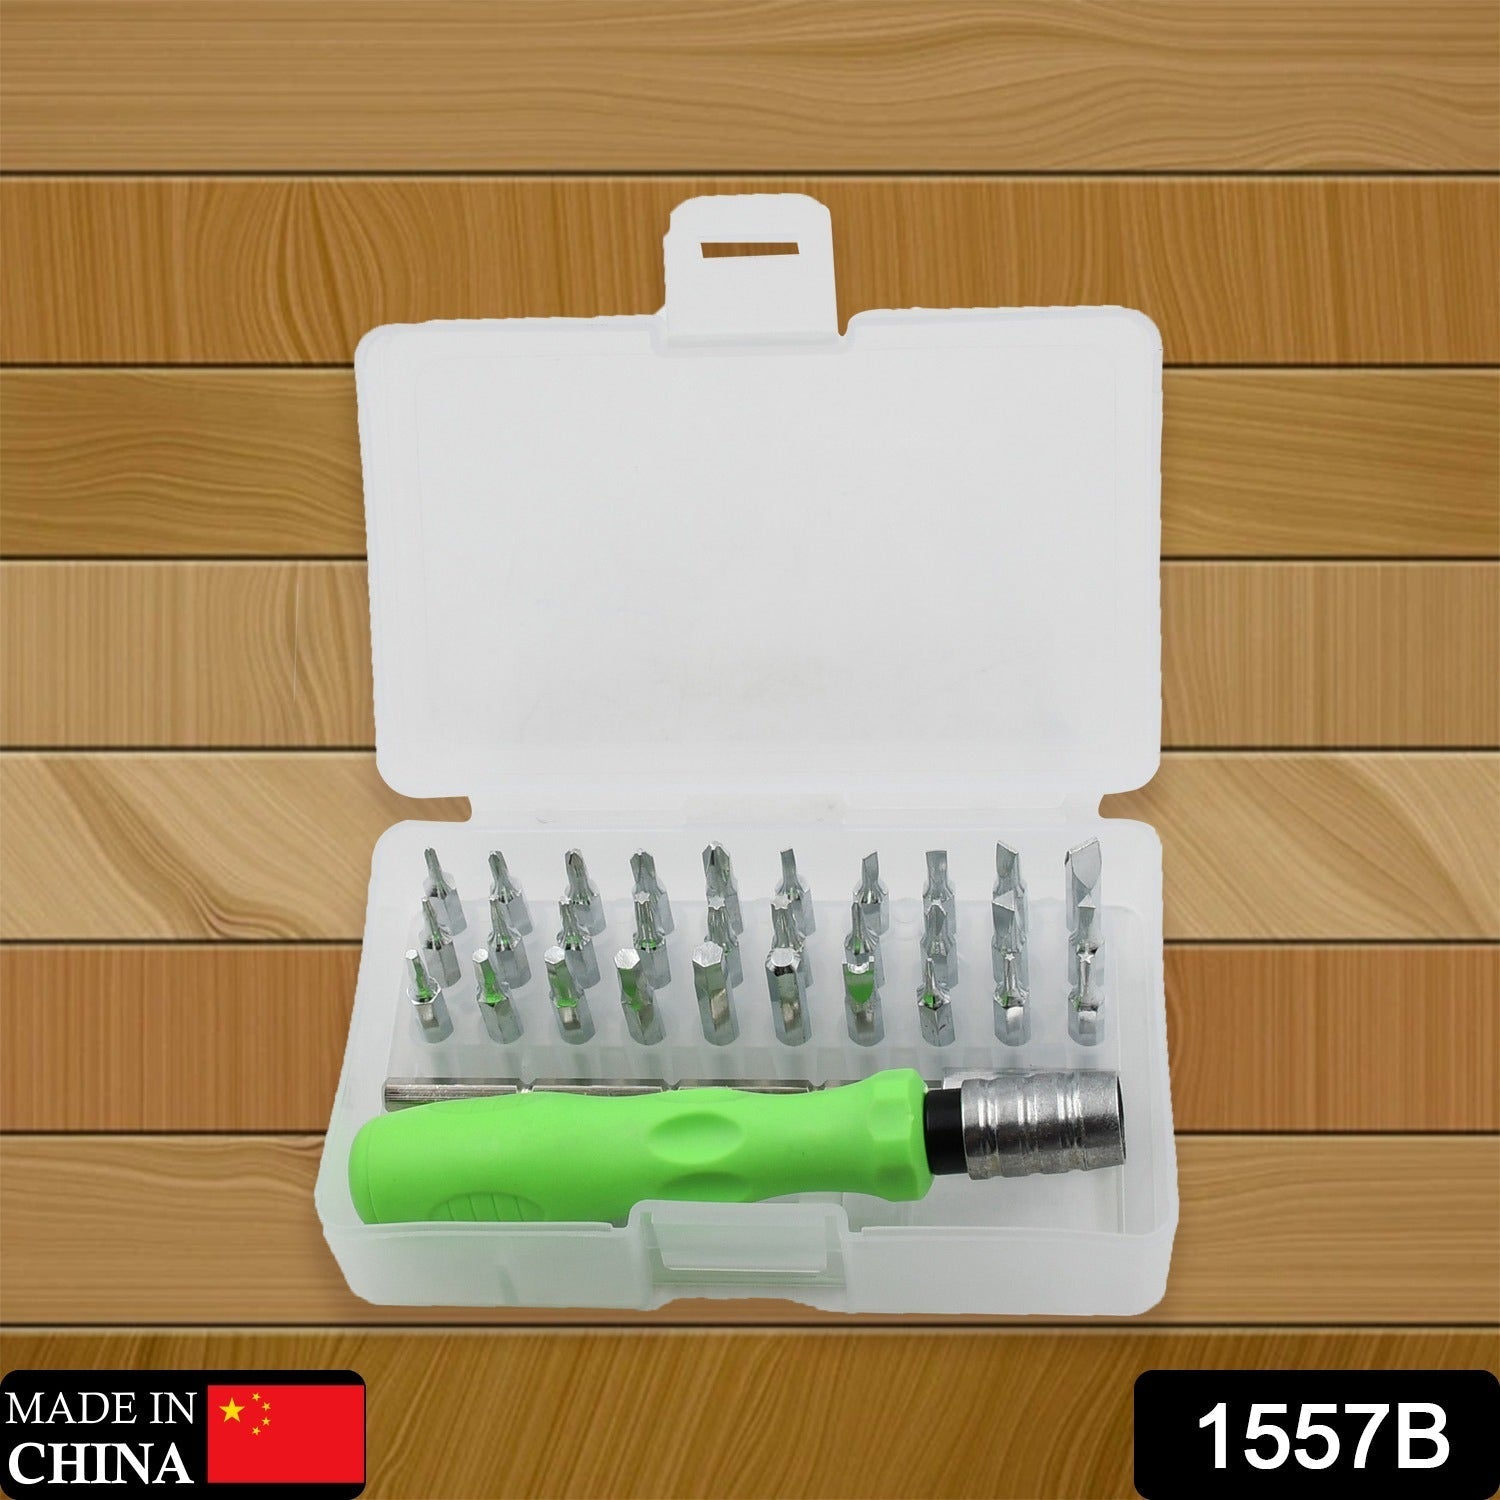 1557B  30 IN 1 MINI SCREWDRIVER BITS SET WITH MAGNETIC FLEXIBLE EXTENSION ROD